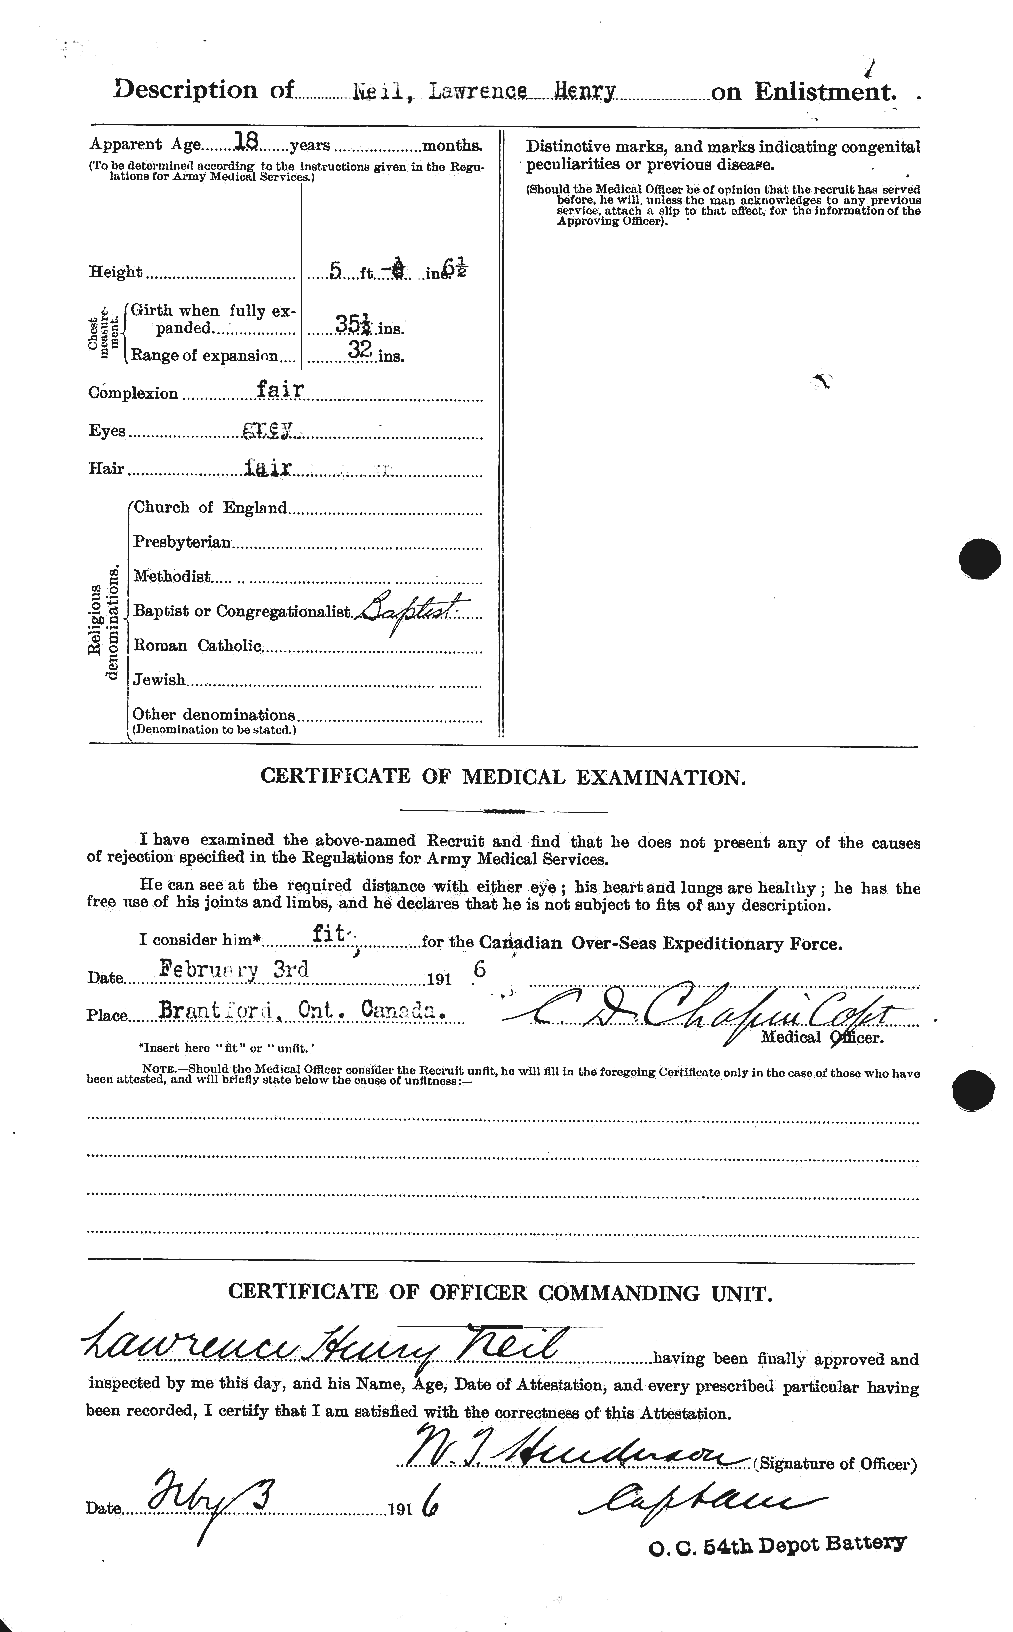 Personnel Records of the First World War - CEF 545612b